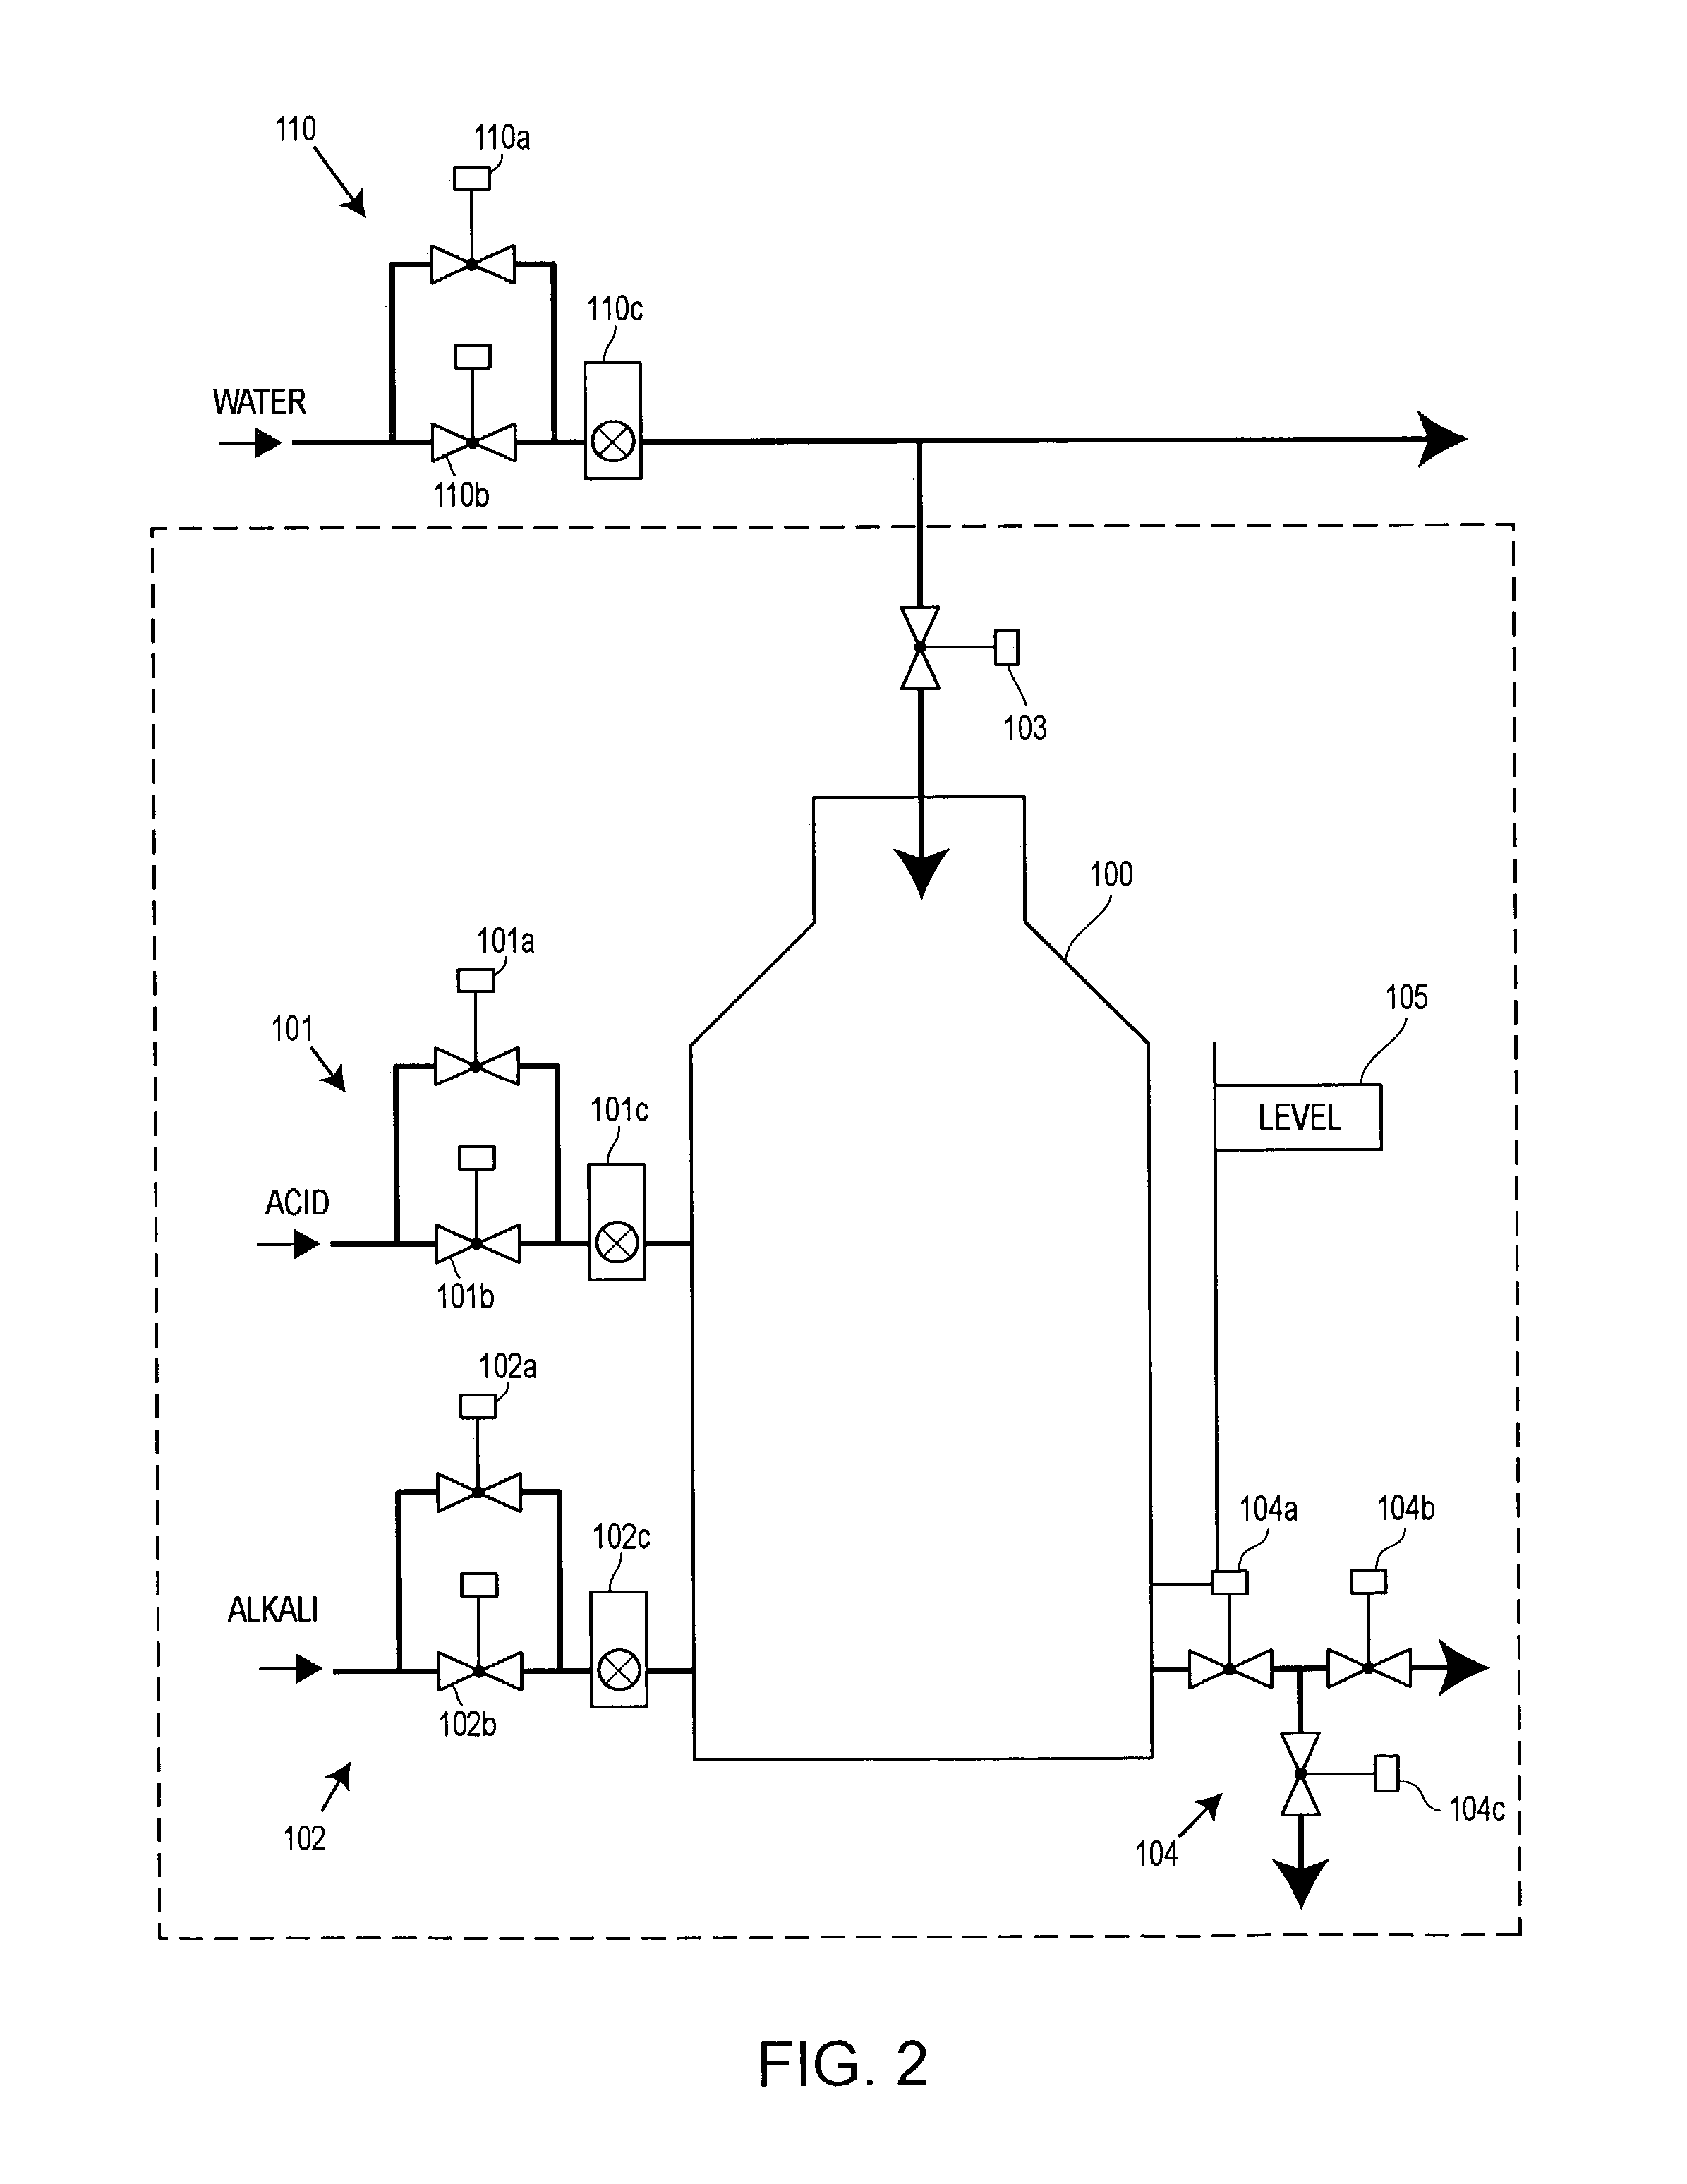 Module class objects in a process plant configuration system